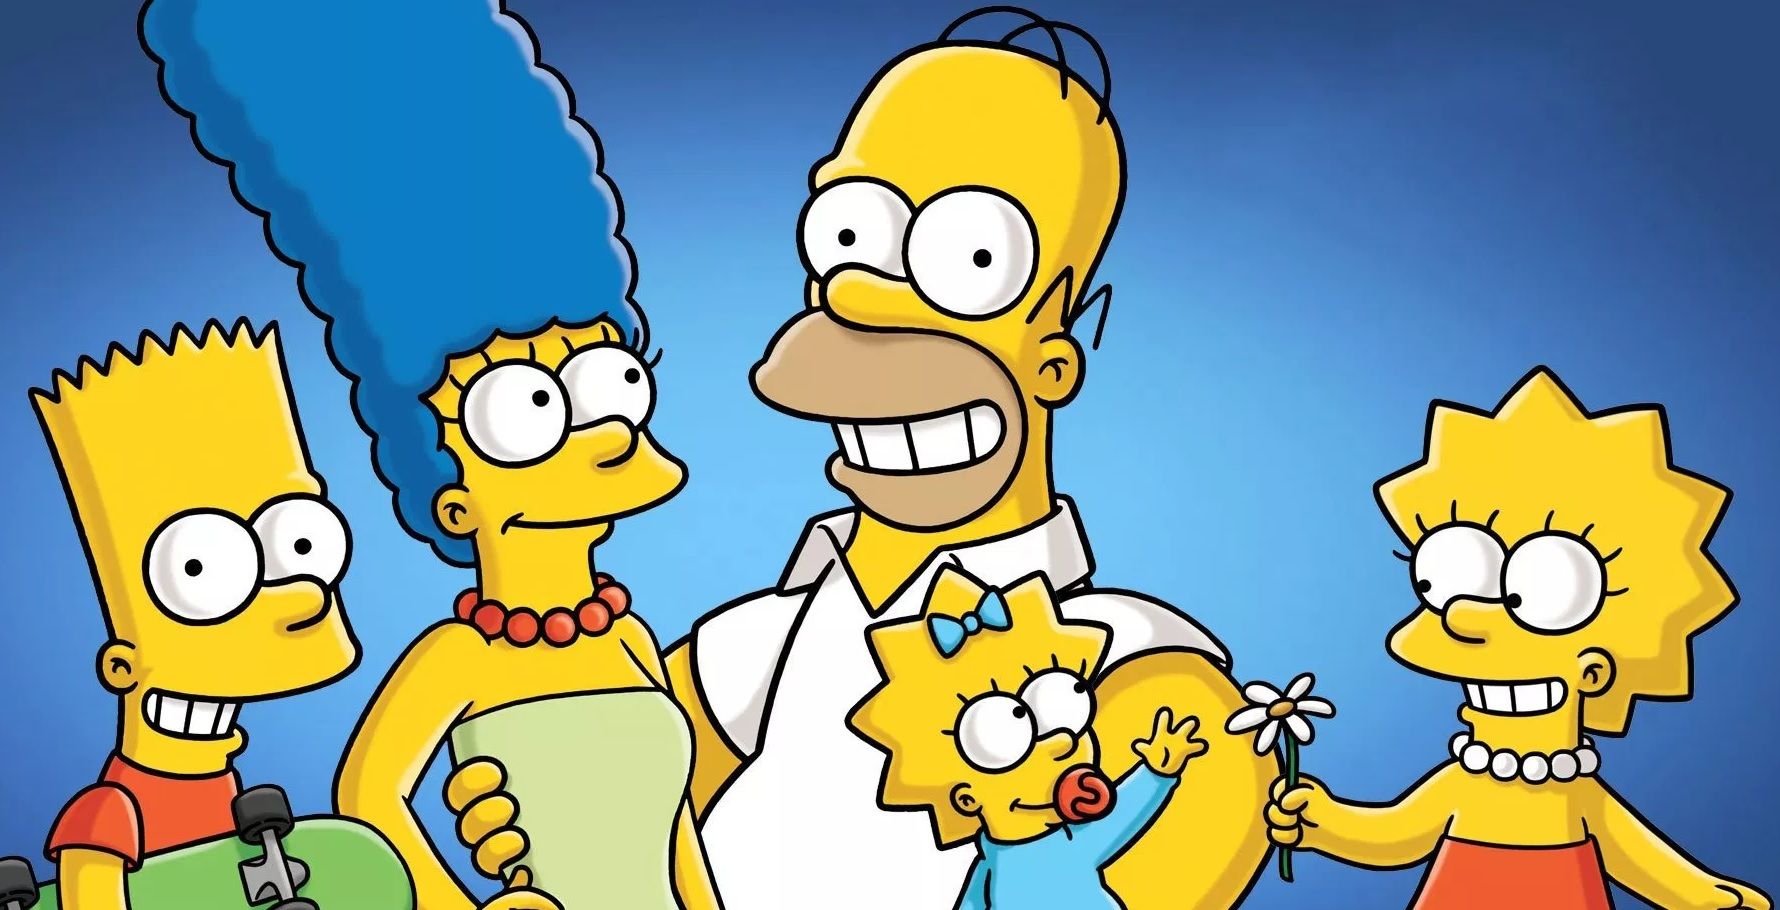 The Simpsons: 5 Reasons It Should Be Canceled (& 5 Why It Should Stay